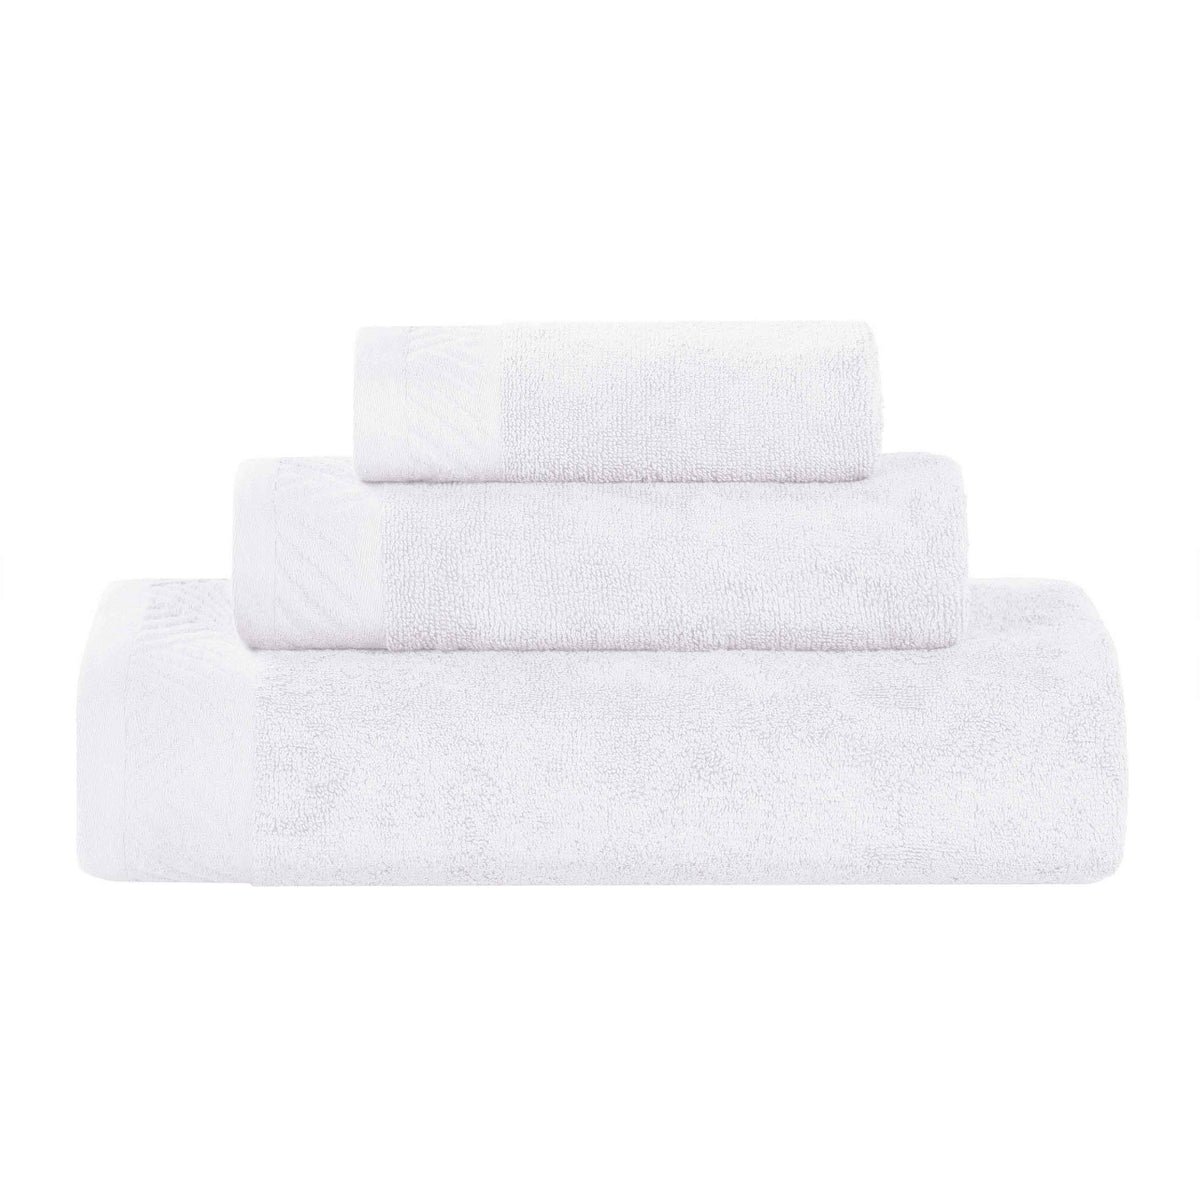 Basketweave Egyptian Cotton Solid 3 Piece Assorted Towel Set